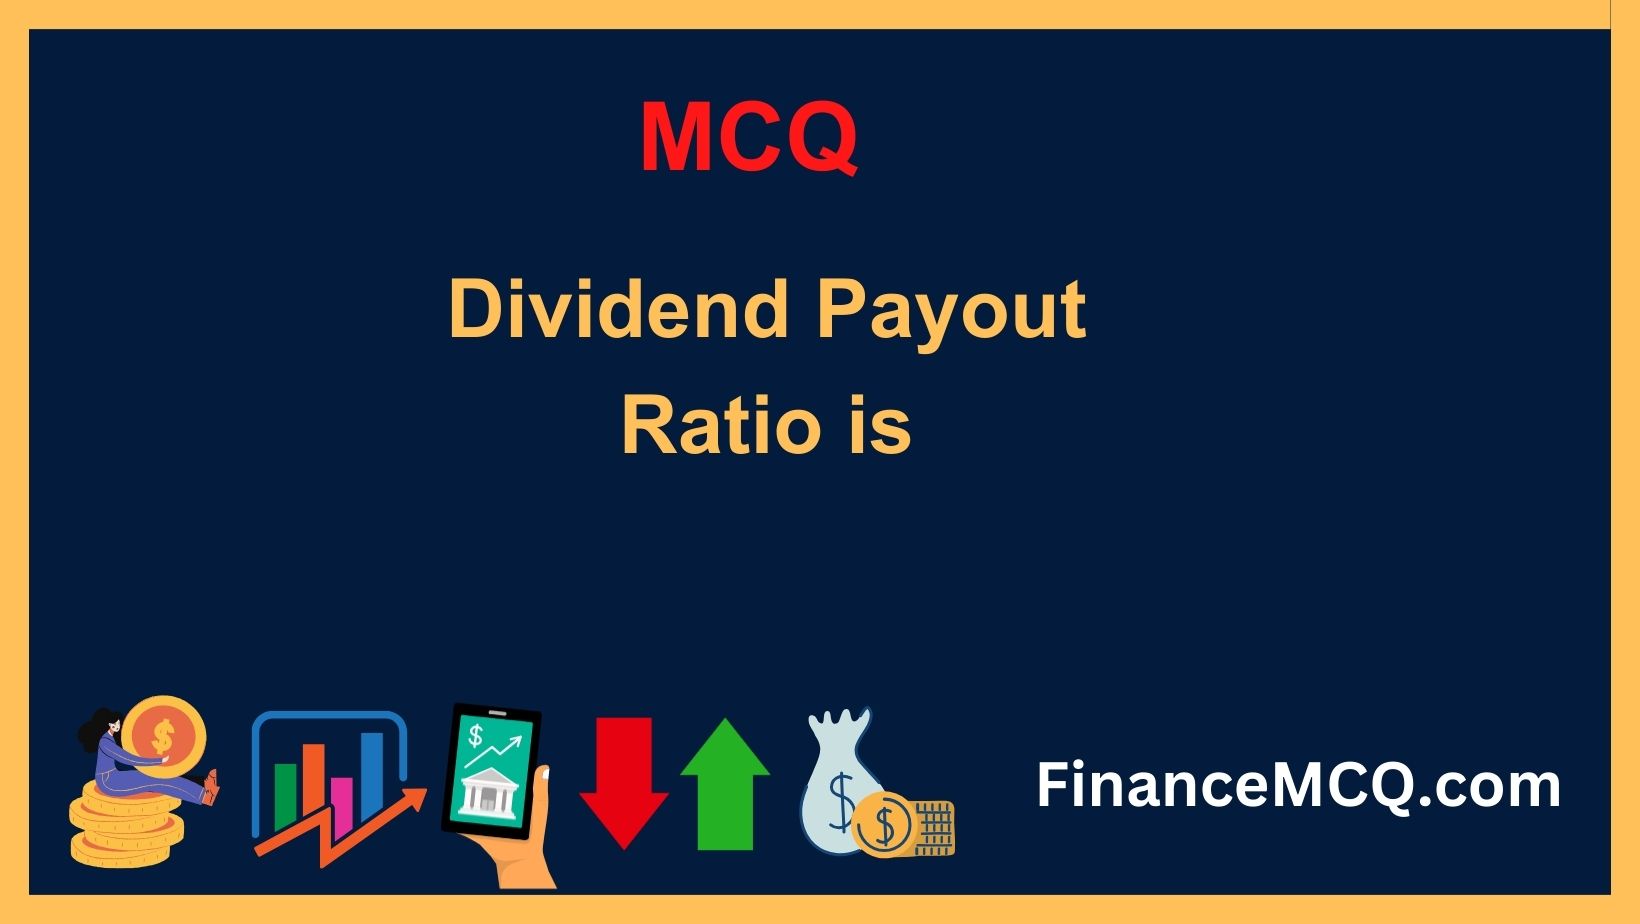 Dividend Payout Ratio is